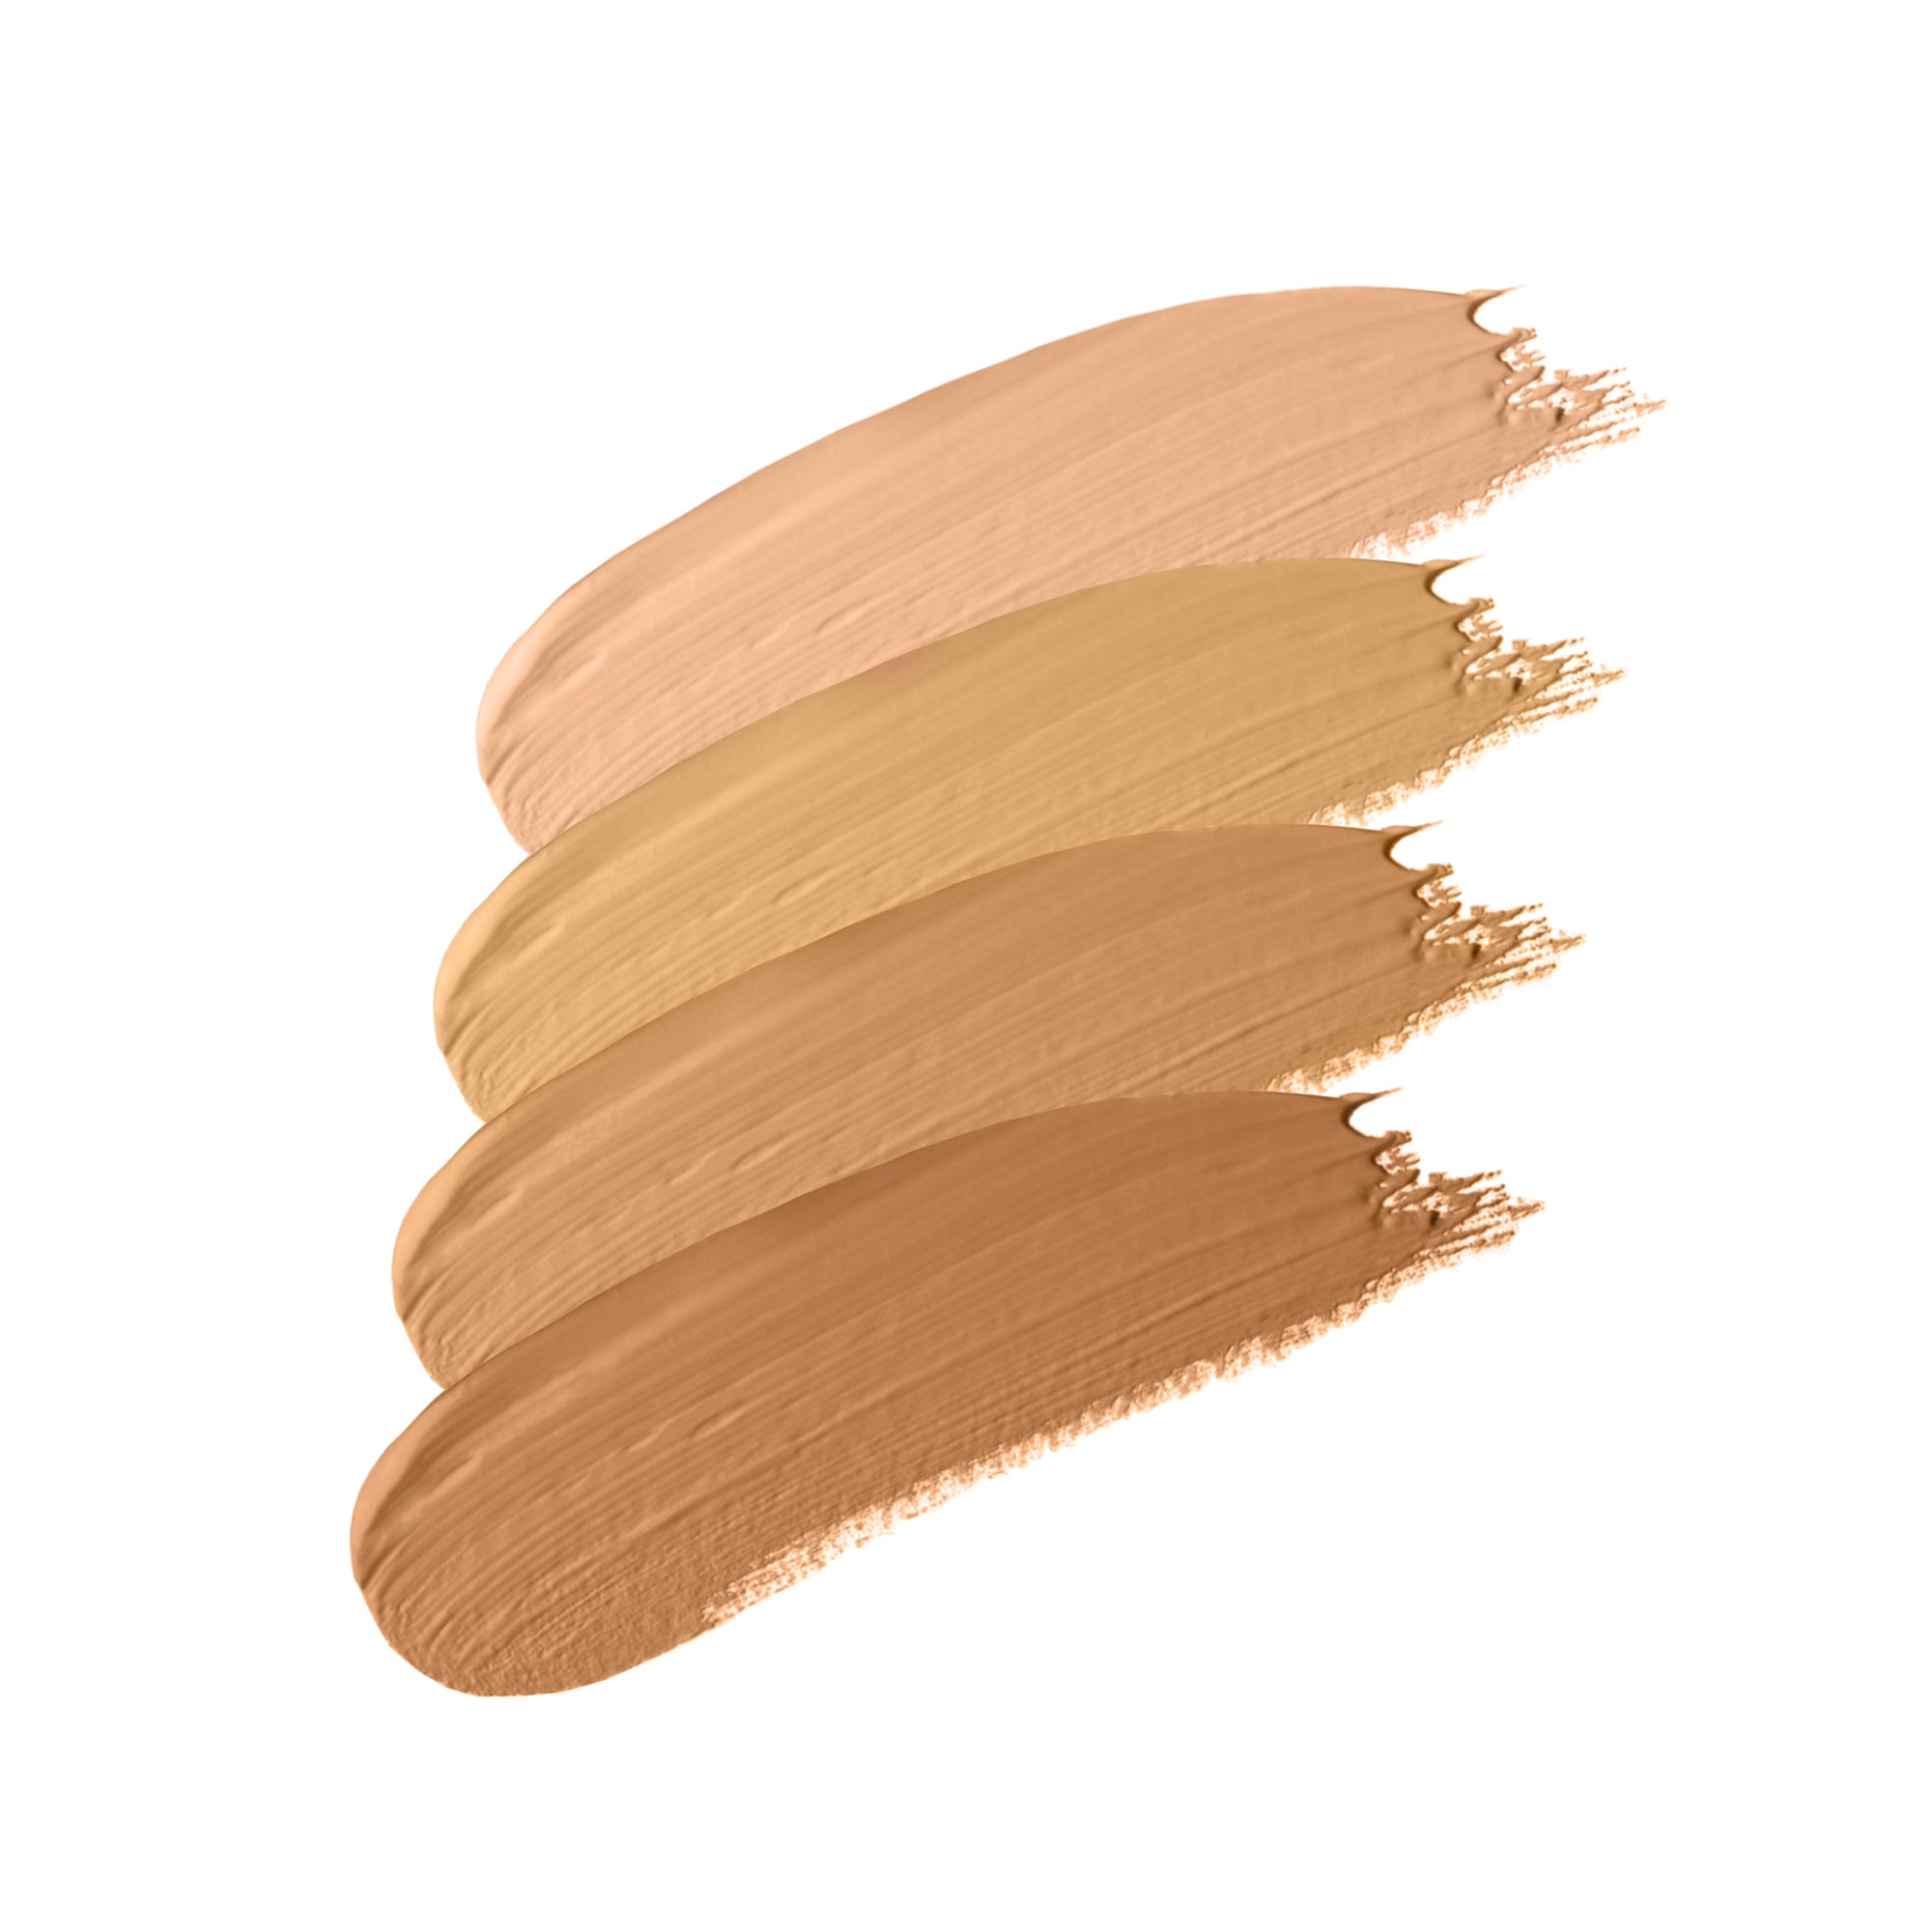 5 - LIGHT TAN - buildable, creamy, hydrating concealer in light tan undertone shade five in group shot